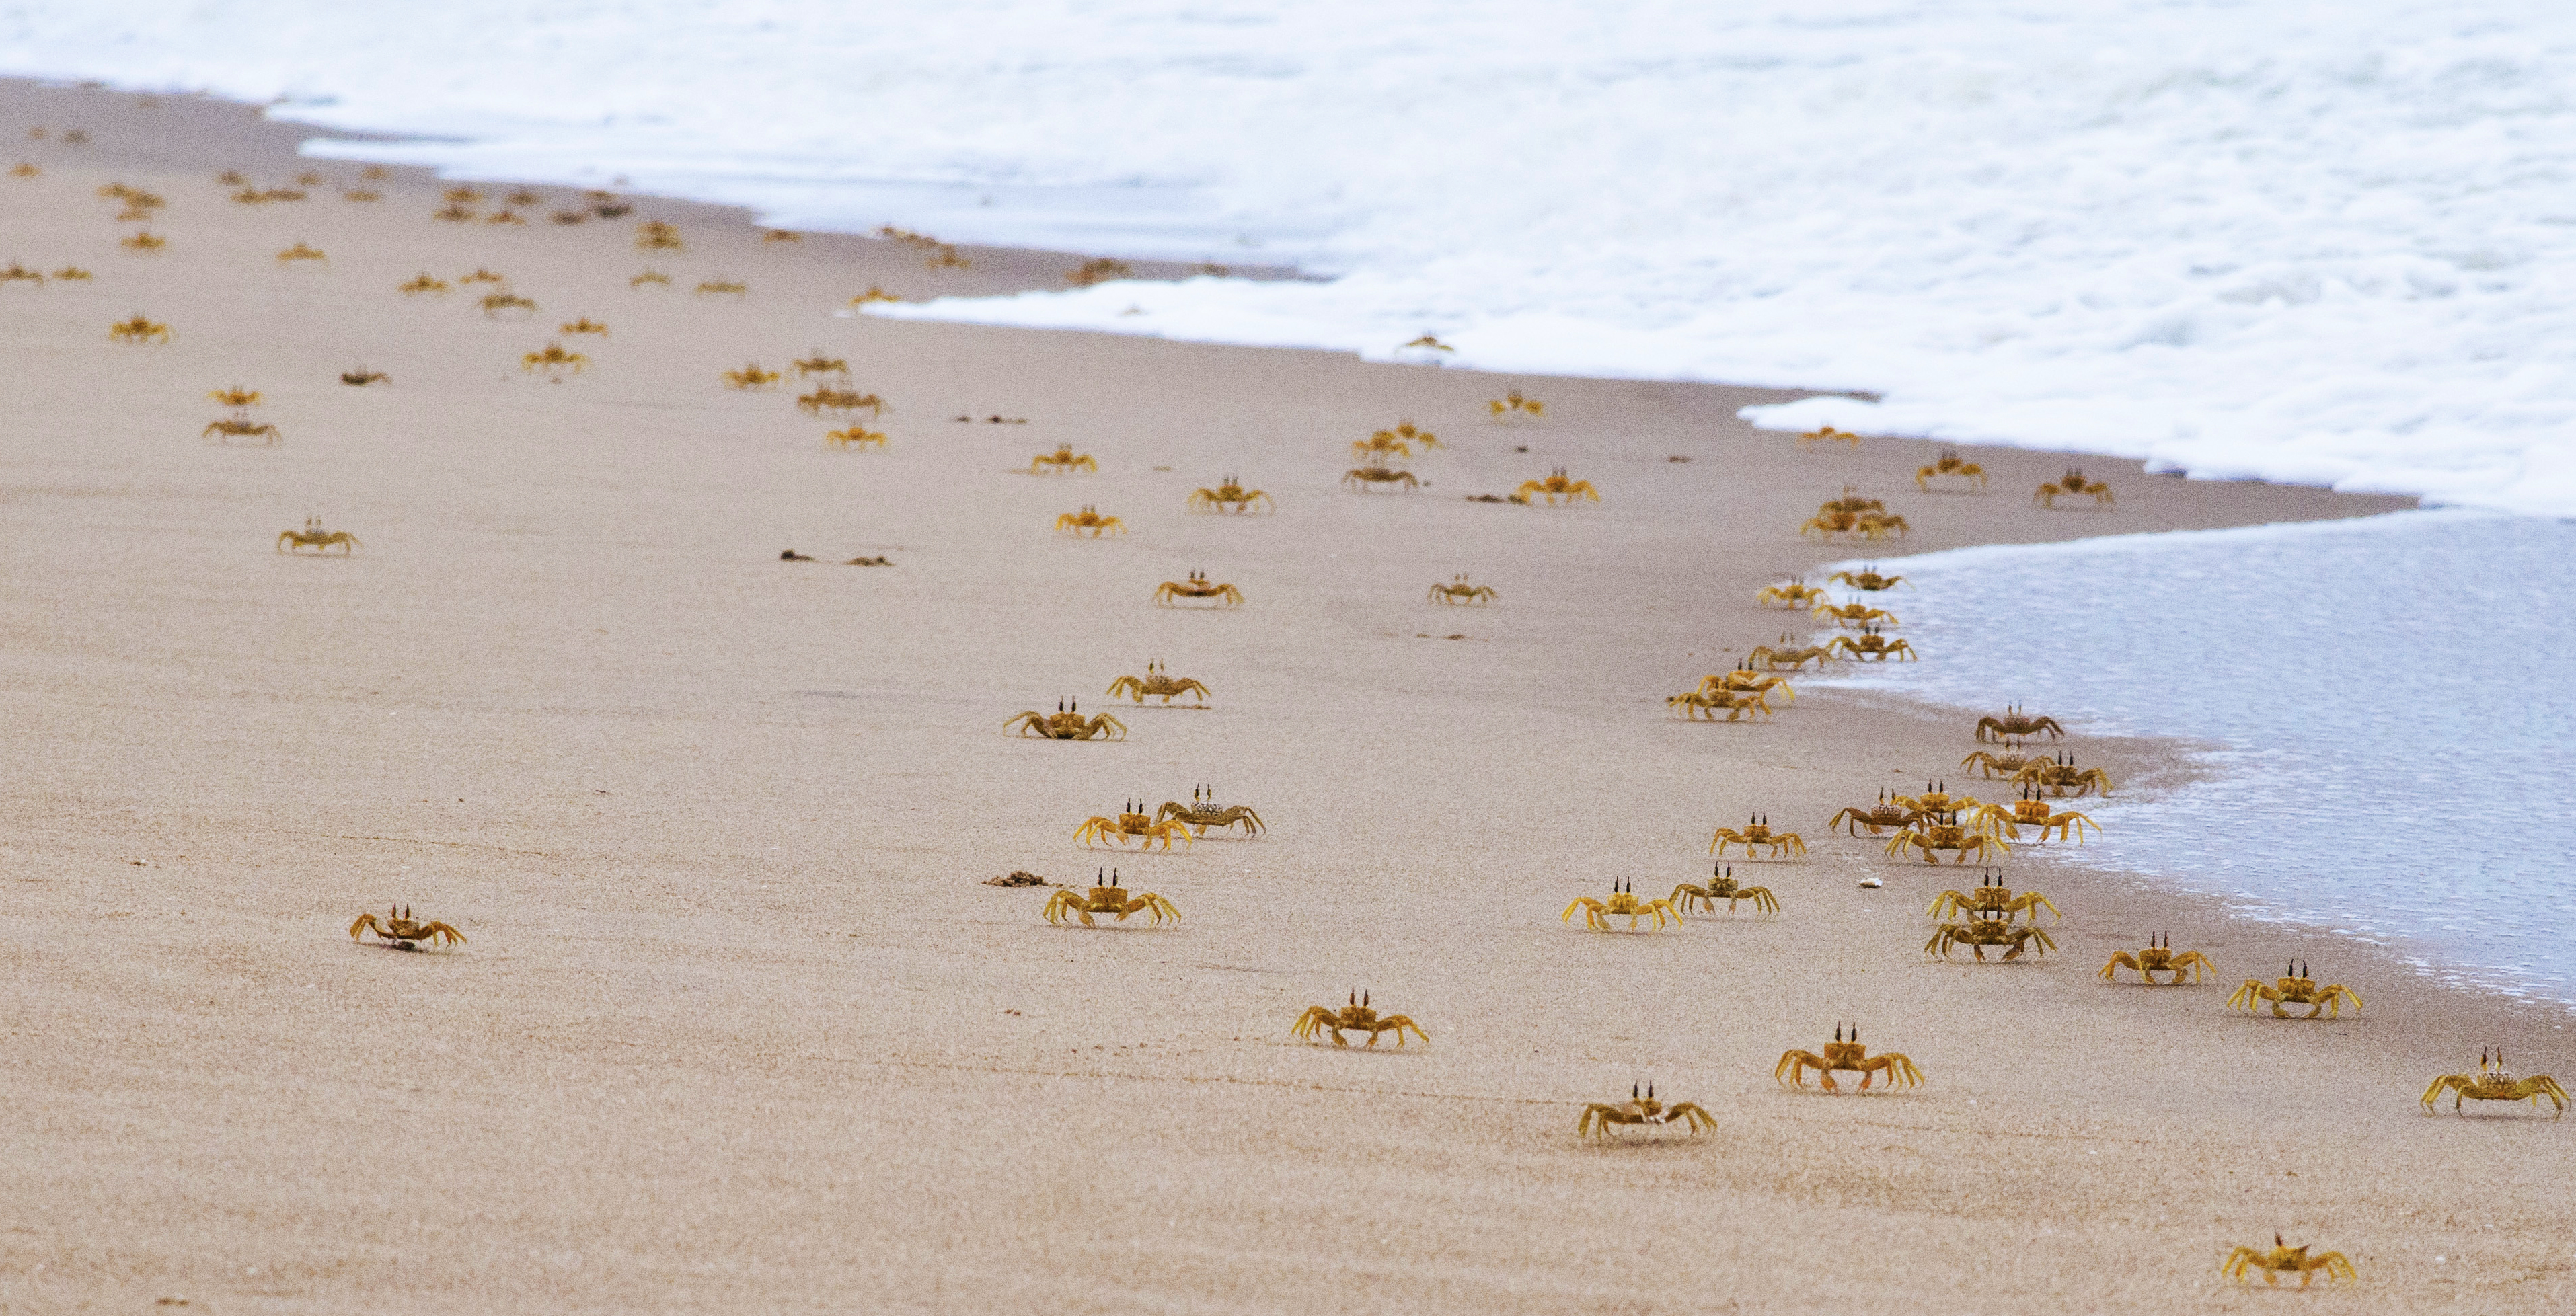 Scurrying Crabs